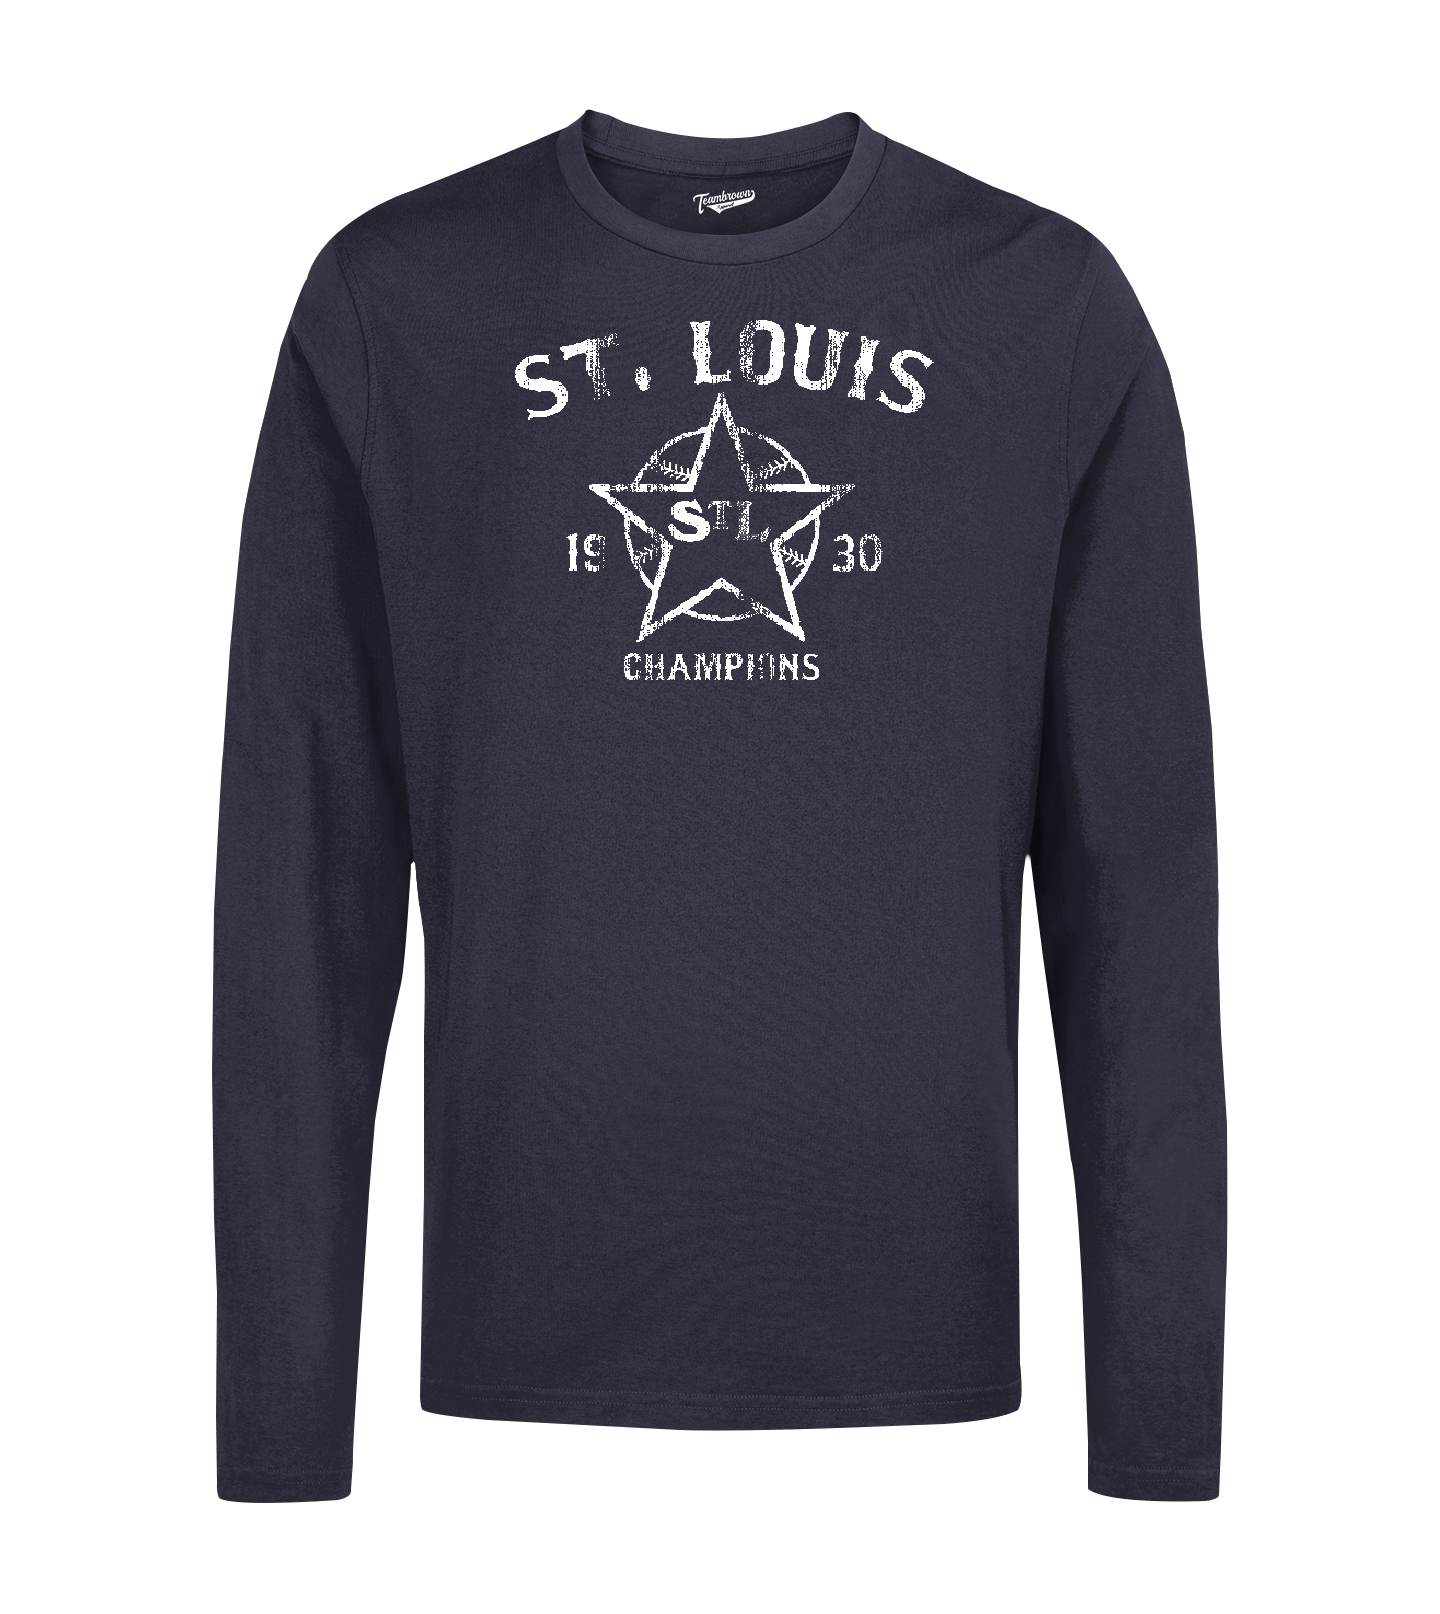 Unisex Teambrown St. Louis Stars Champions Collection T-Shirt